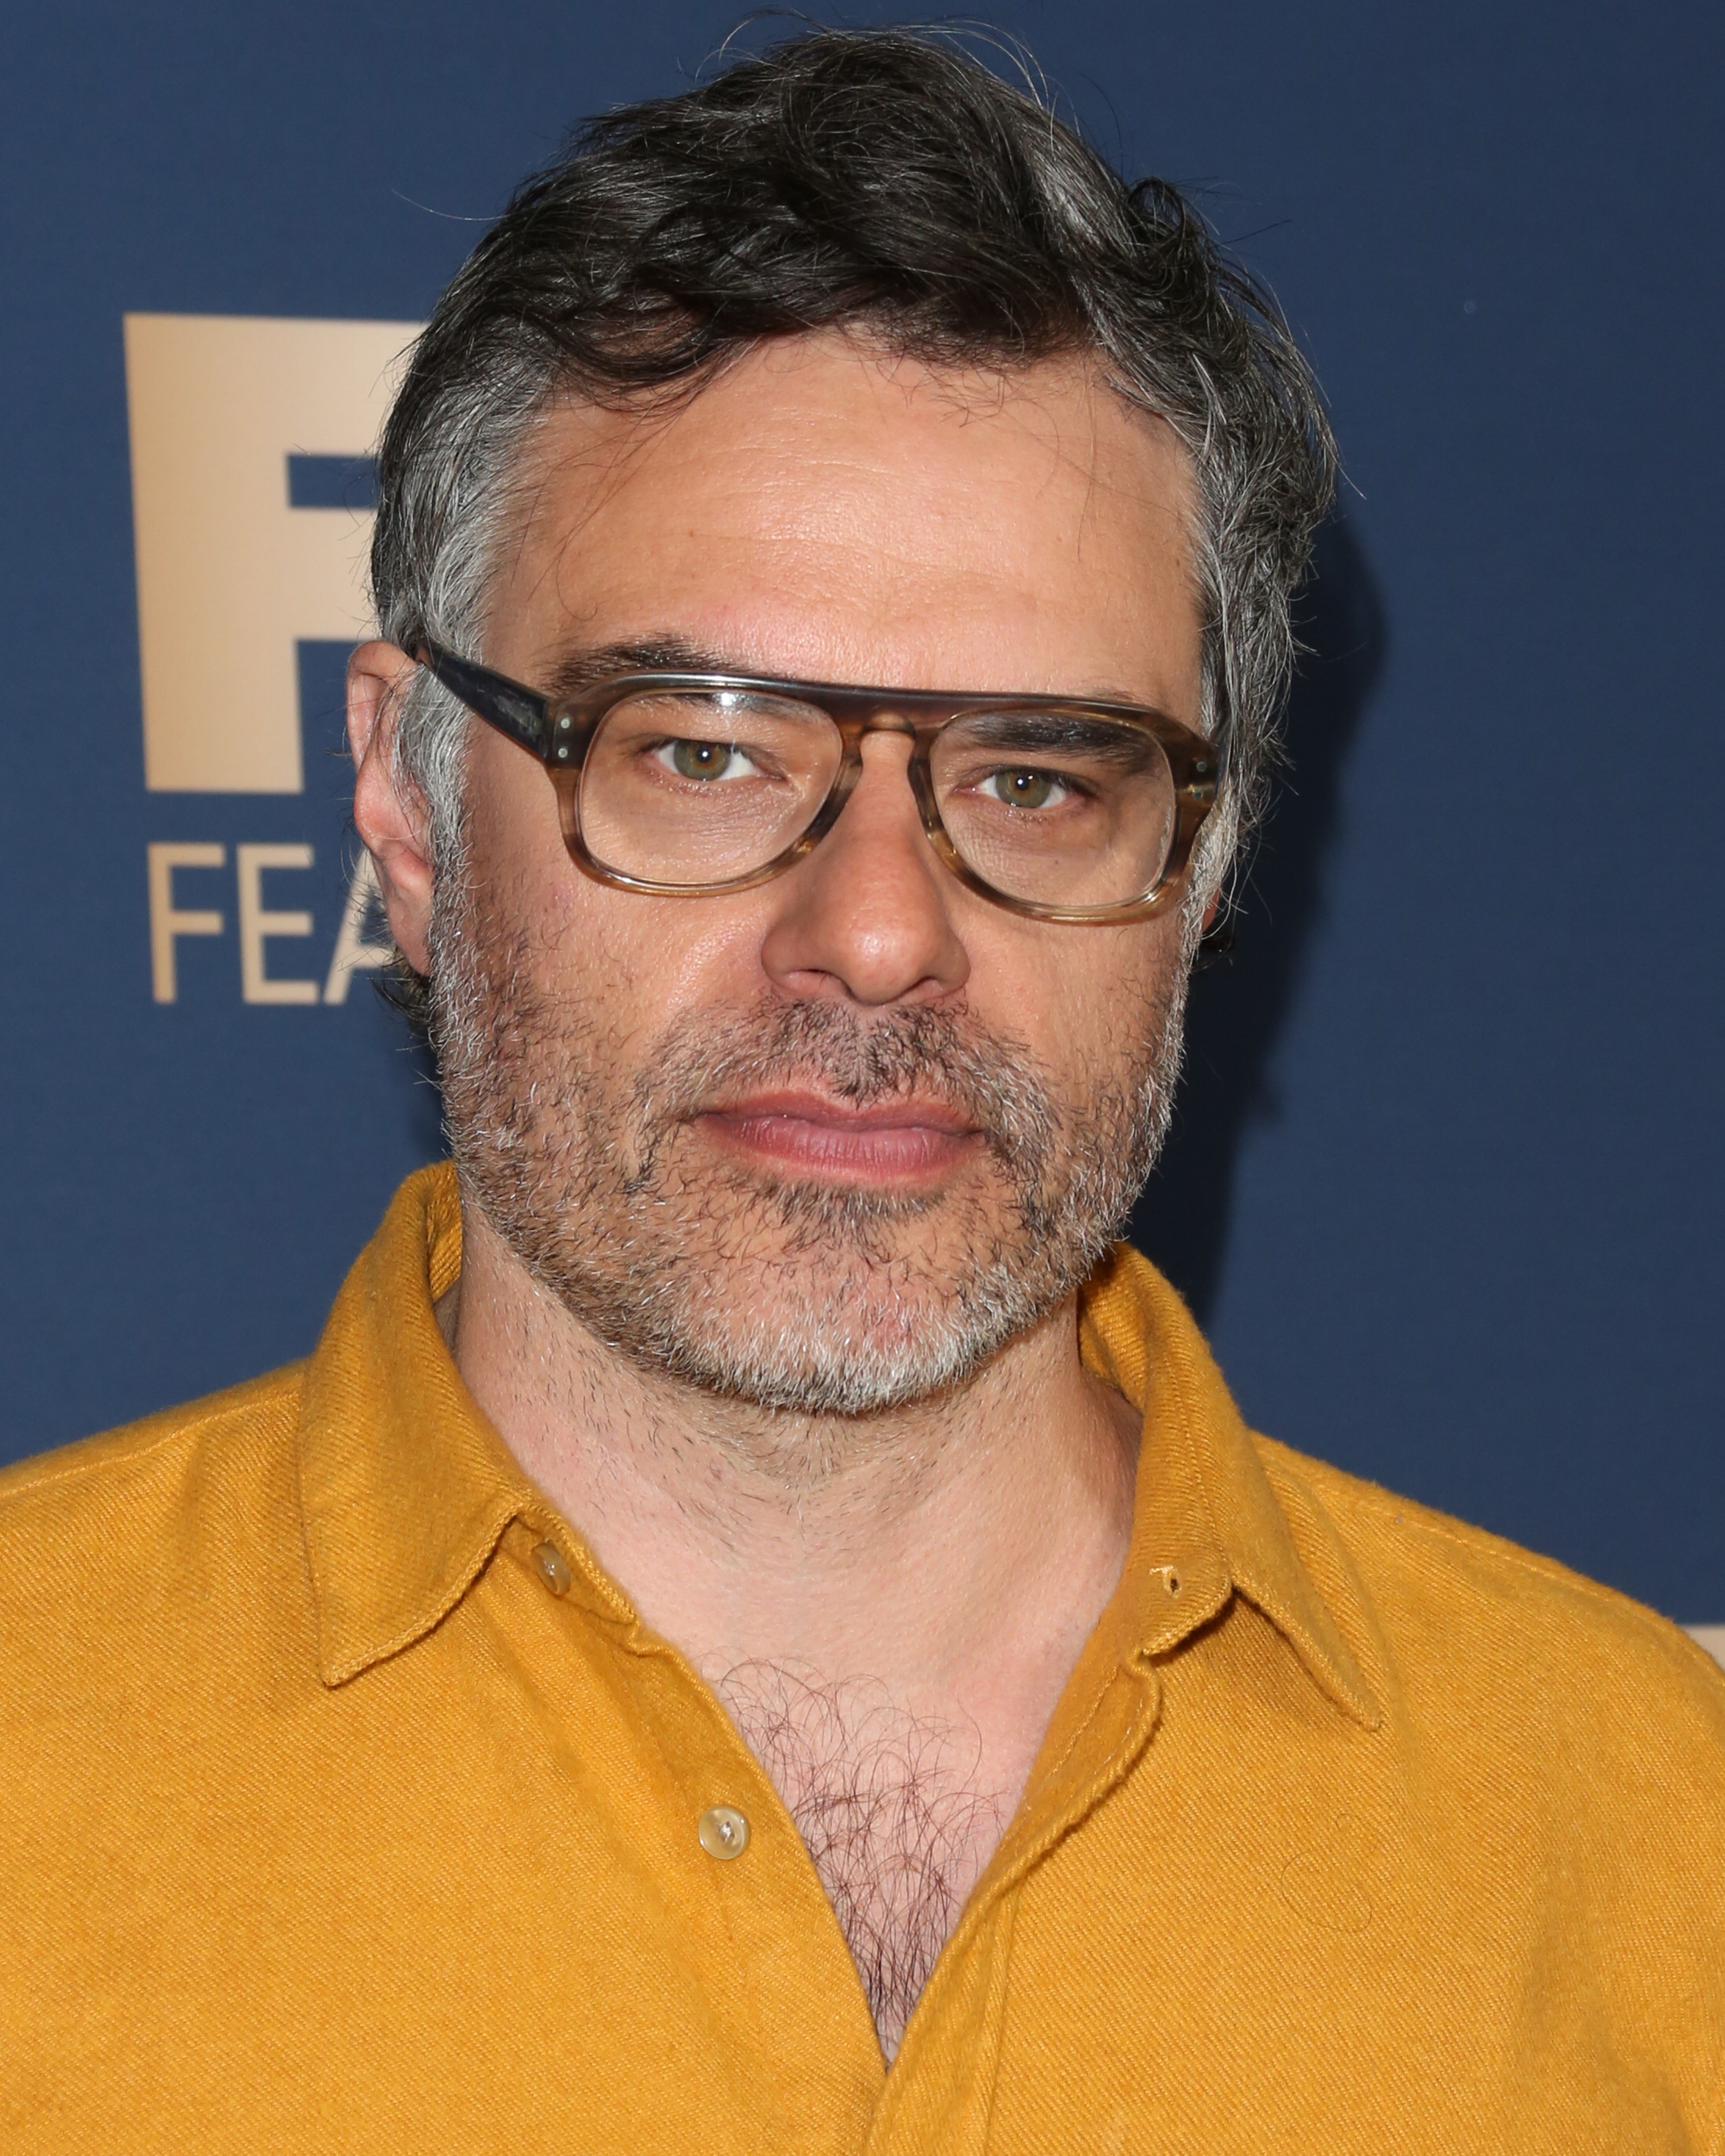 Jemaine Clement on the red carpet